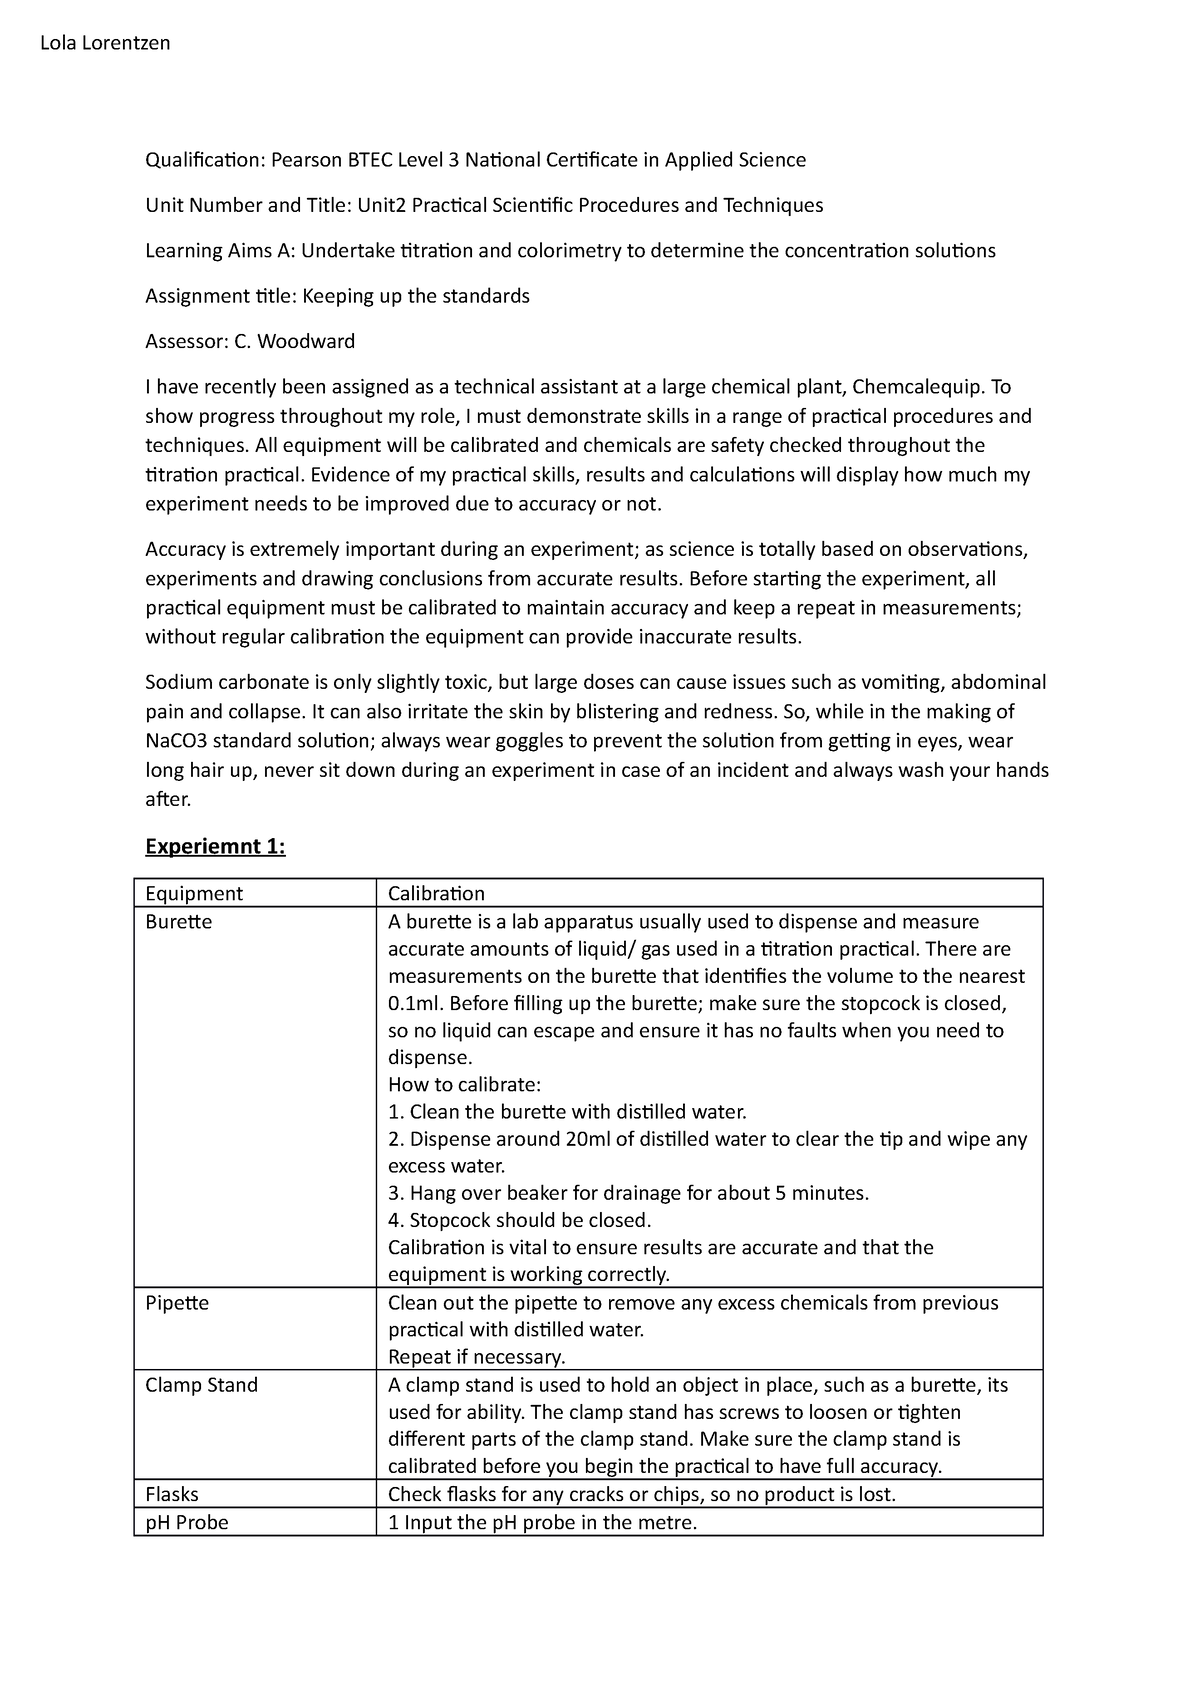 btec applied science level 3 chromatography assignment